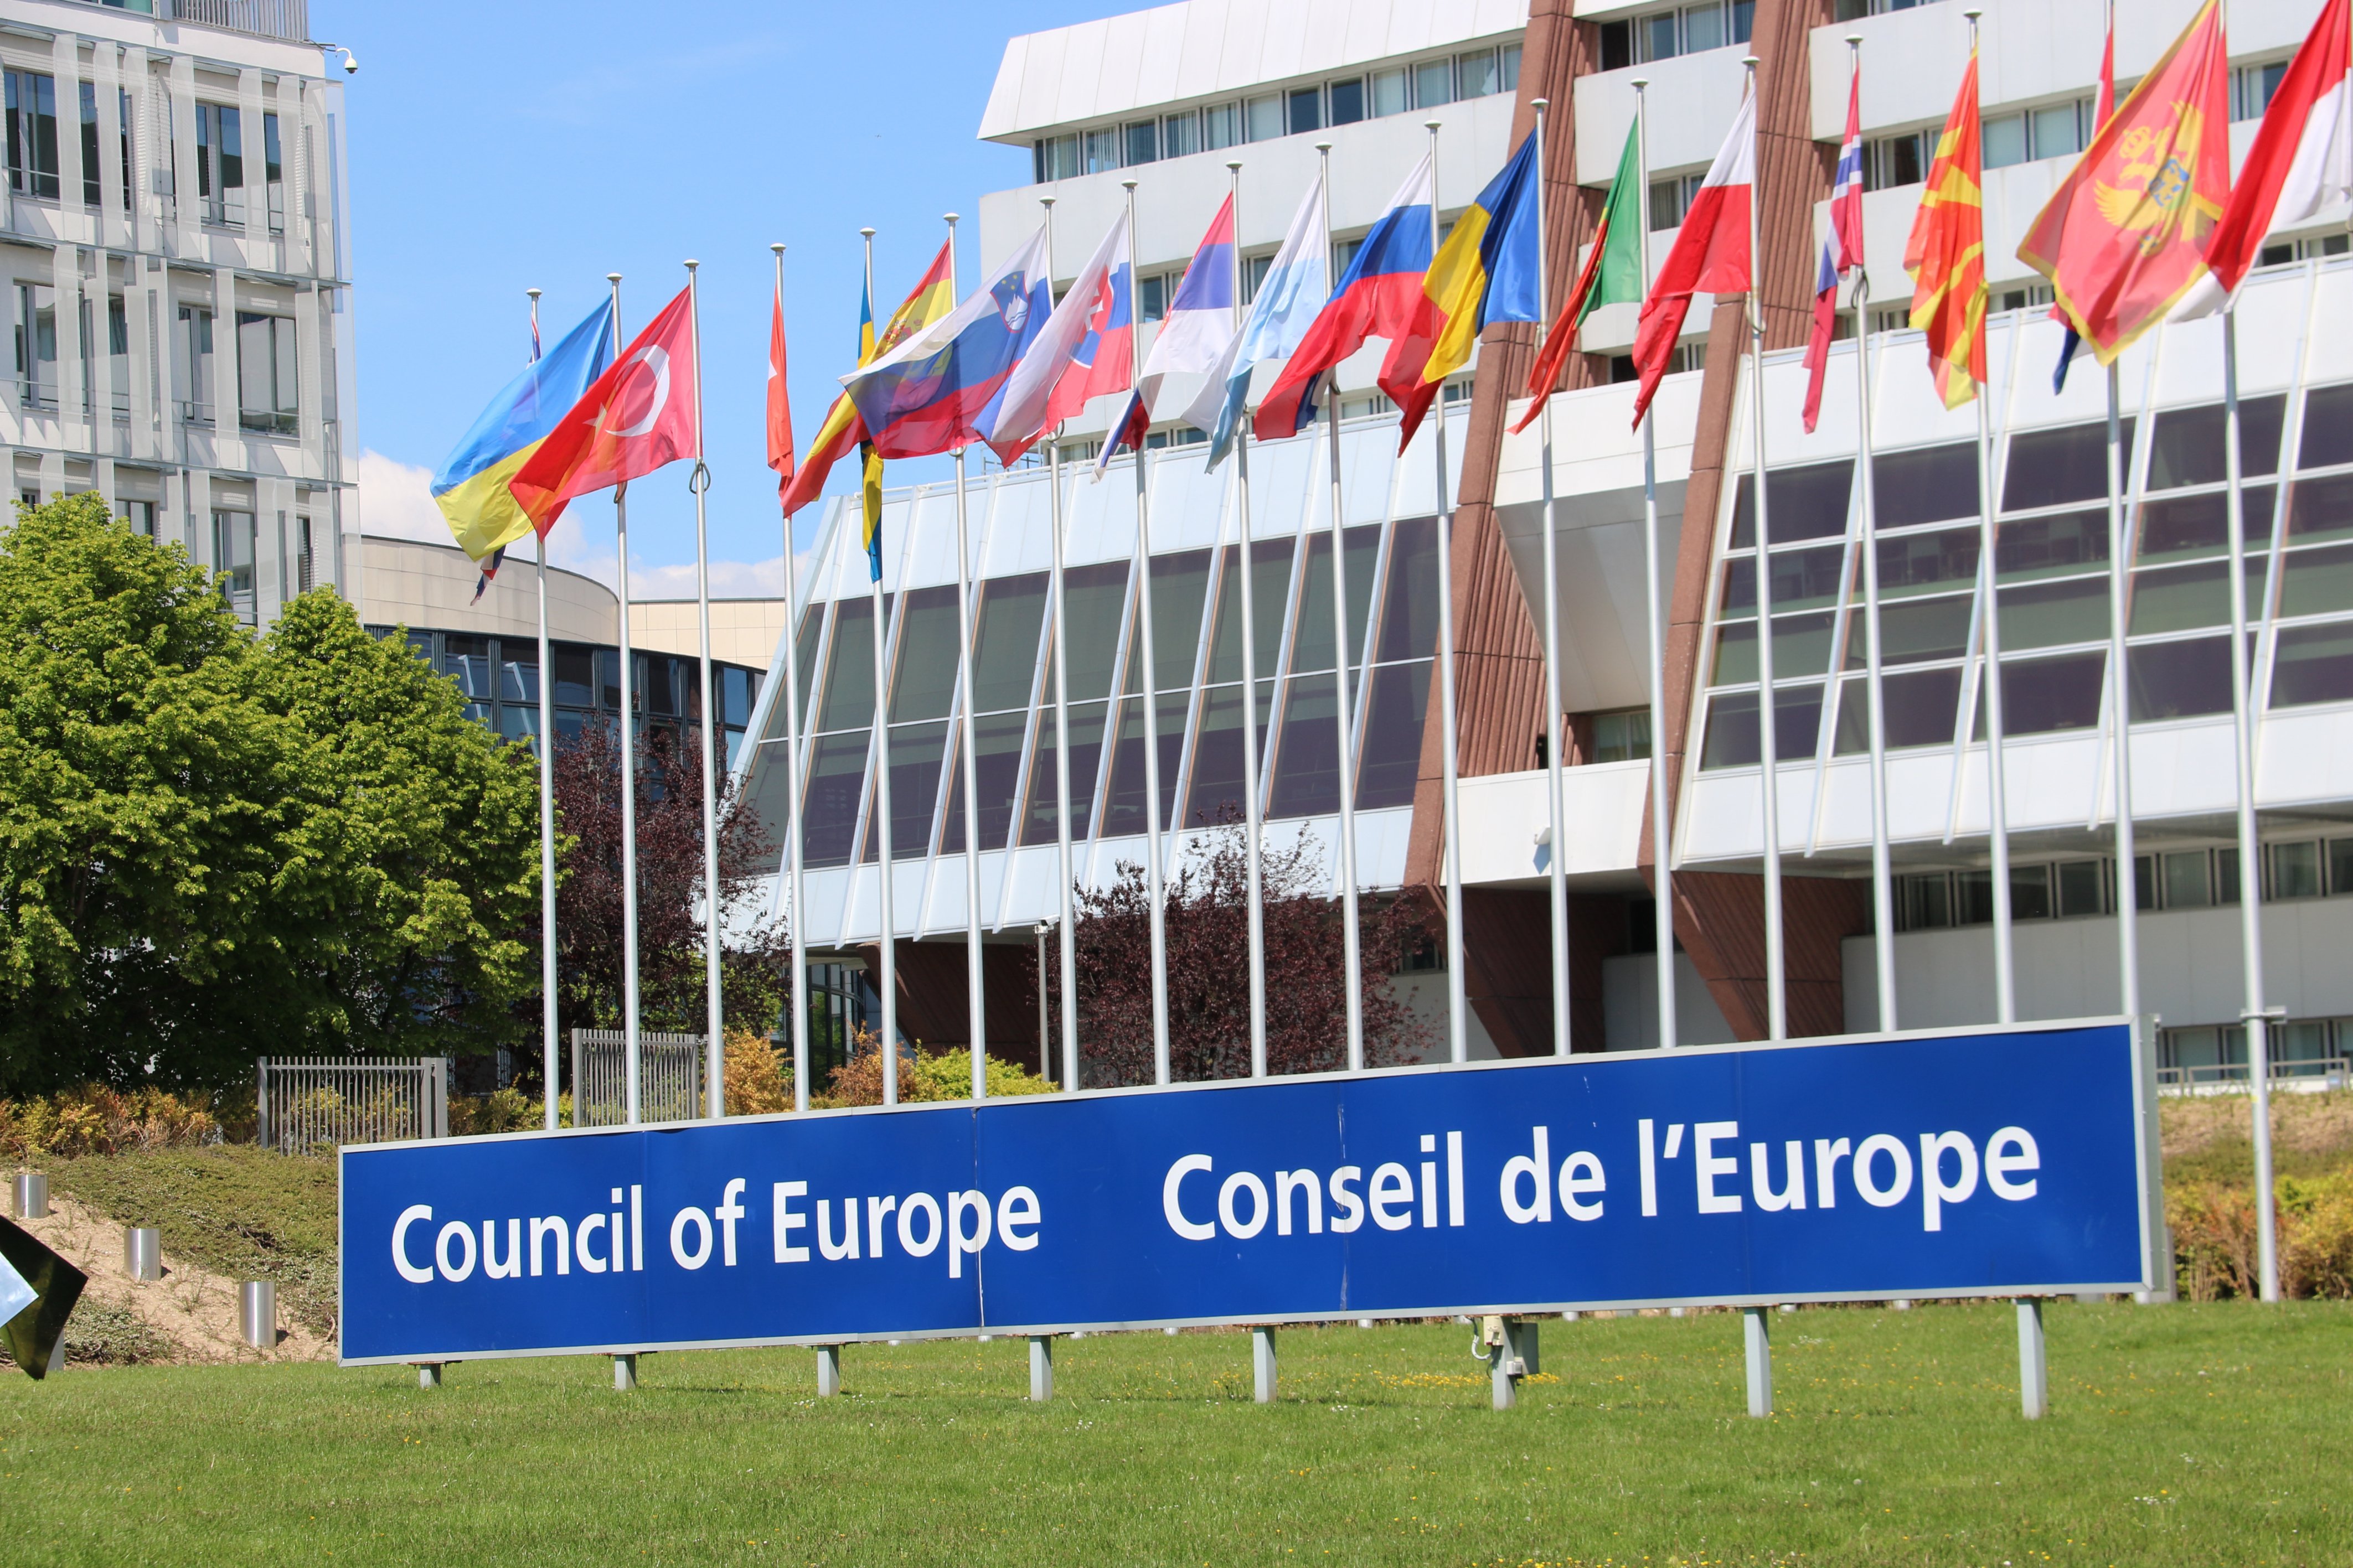 Council of Europe commissioner reacts to Pegasus spyware abuses: "I am alarmed"